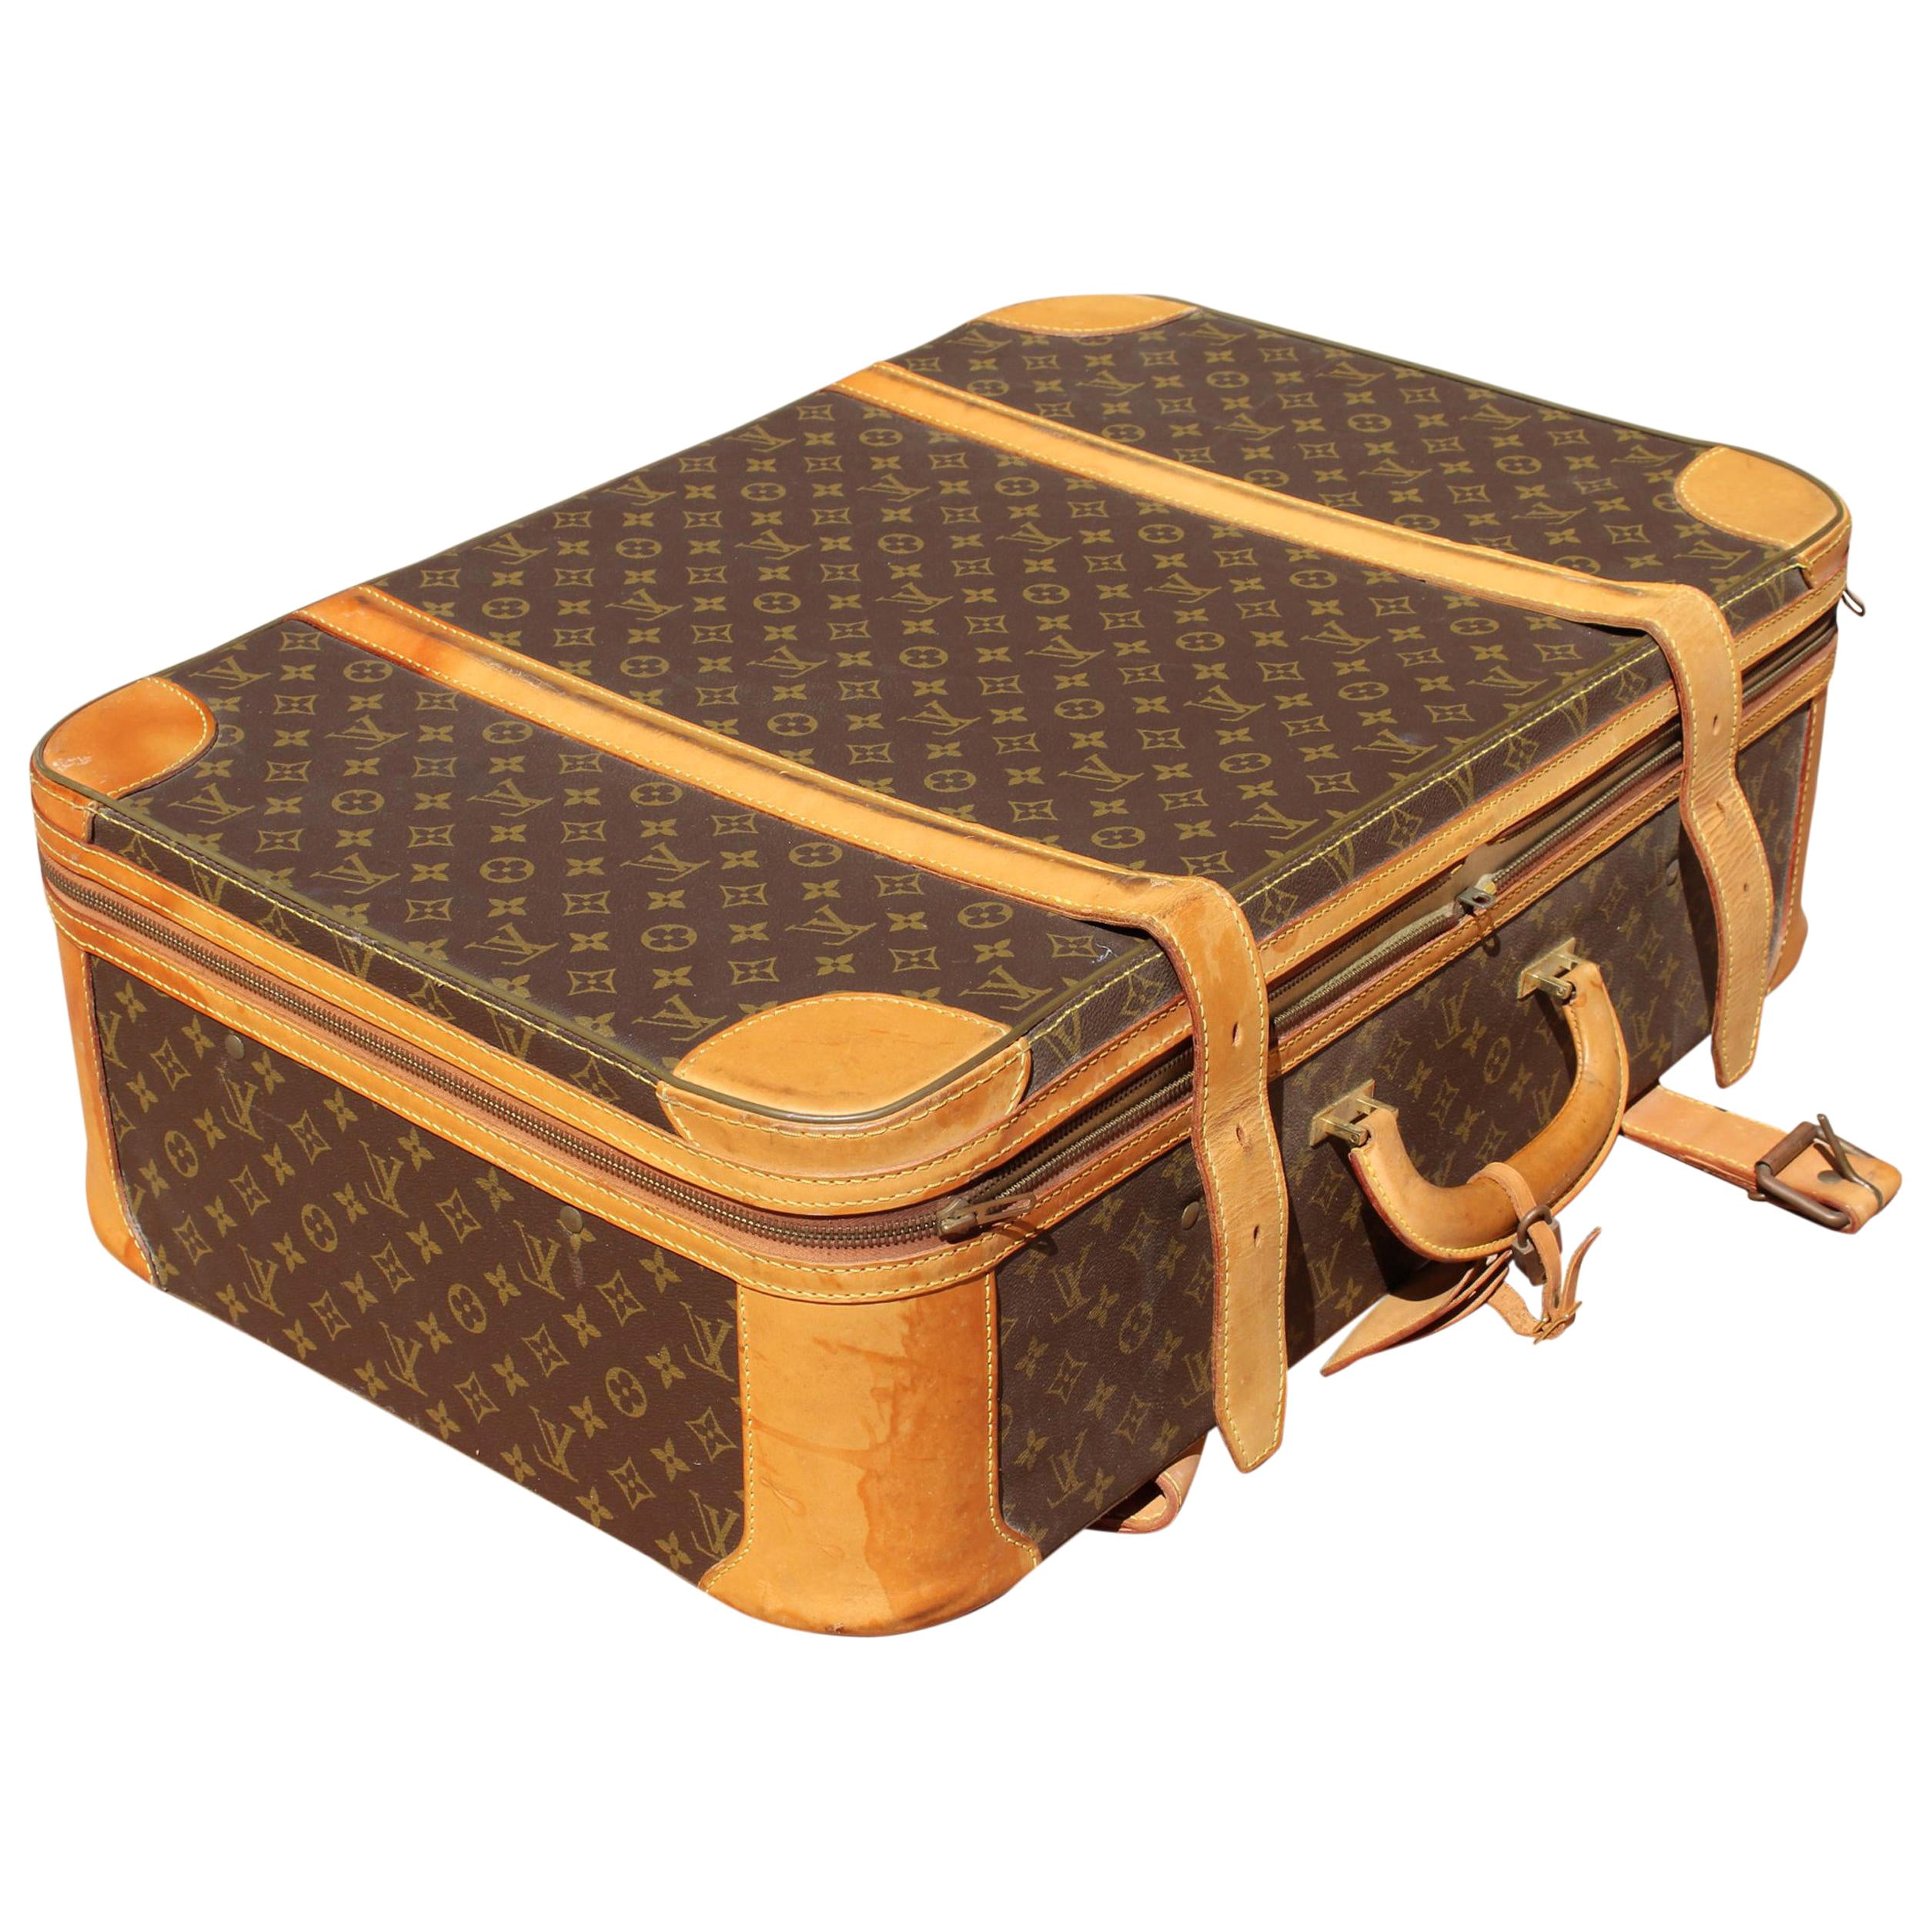 Art or Baggage When is Louis Vuitton Luggage a Piece of Art Fellows Blog